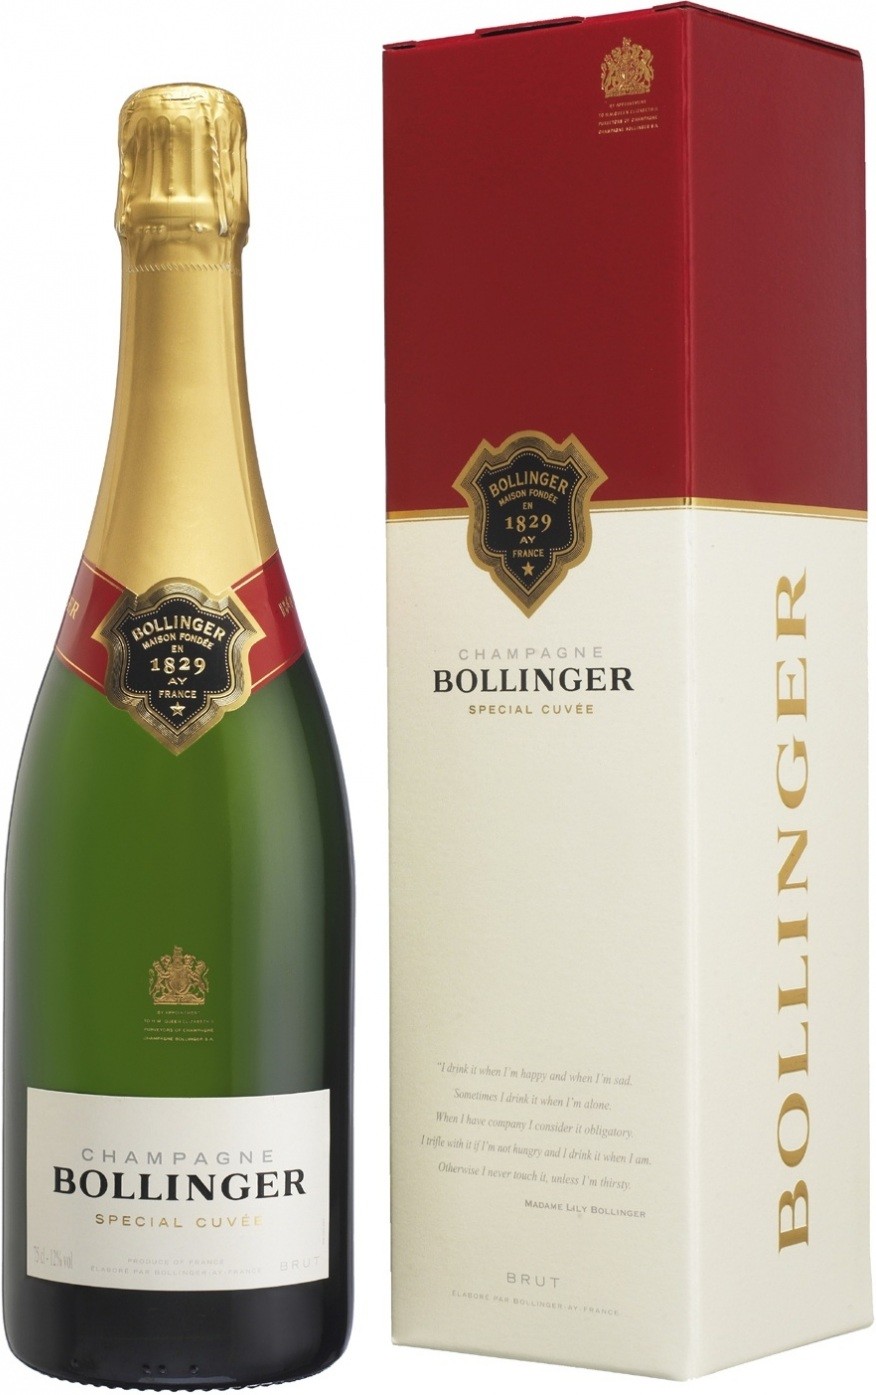 Bollinger Special Cuvee Brut gift box